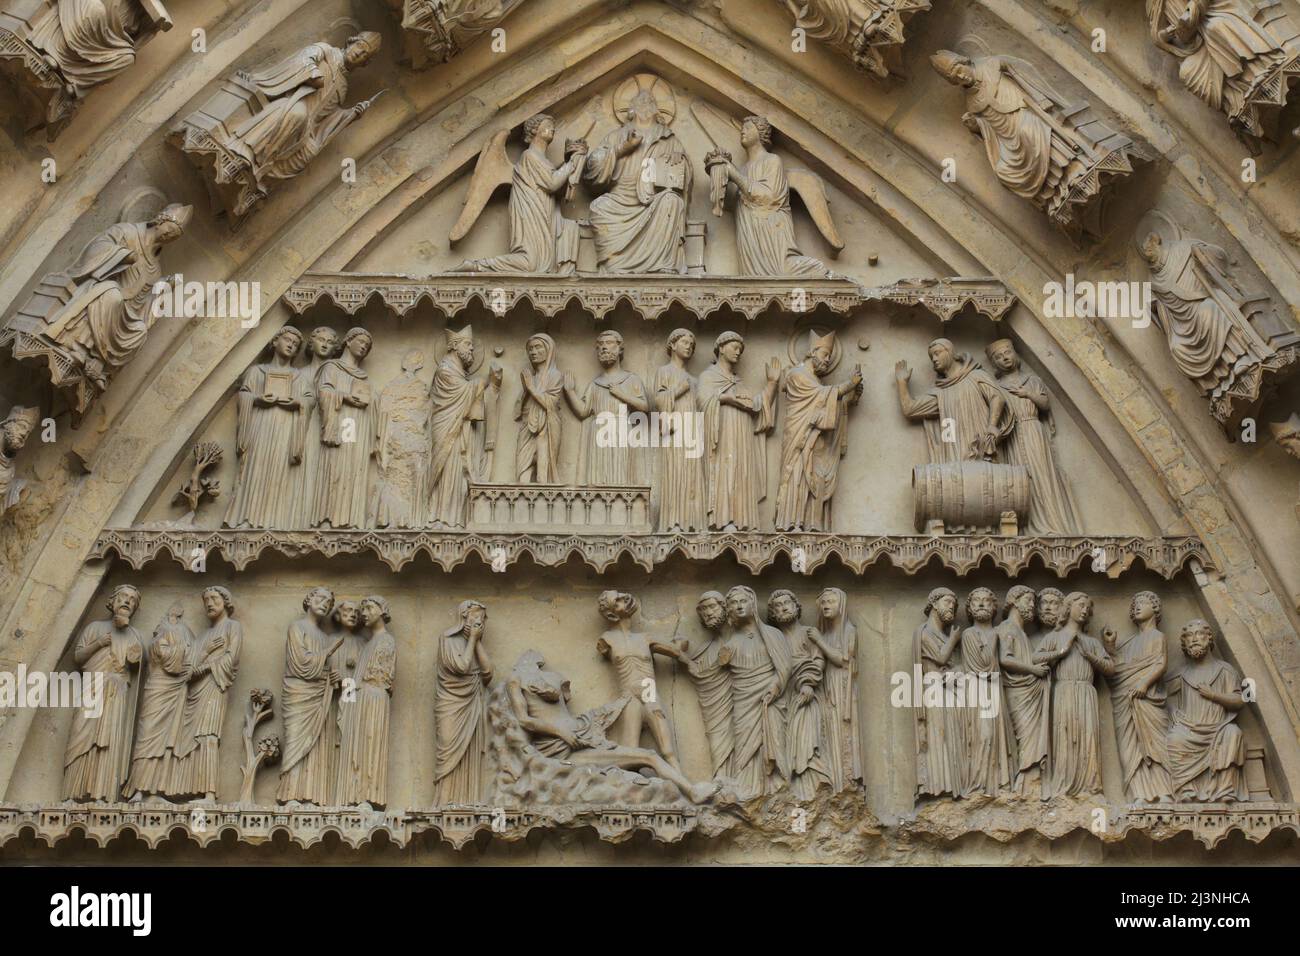 Miracles of Saint Remigius of Reims (upper level) and the Biblical story of Job (lower level) depicted in the tympanum of the central portal of the north facade of the Reims Cathedral (Cathédrale Notre-Dame de Reims) in Reims, France. Stock Photo